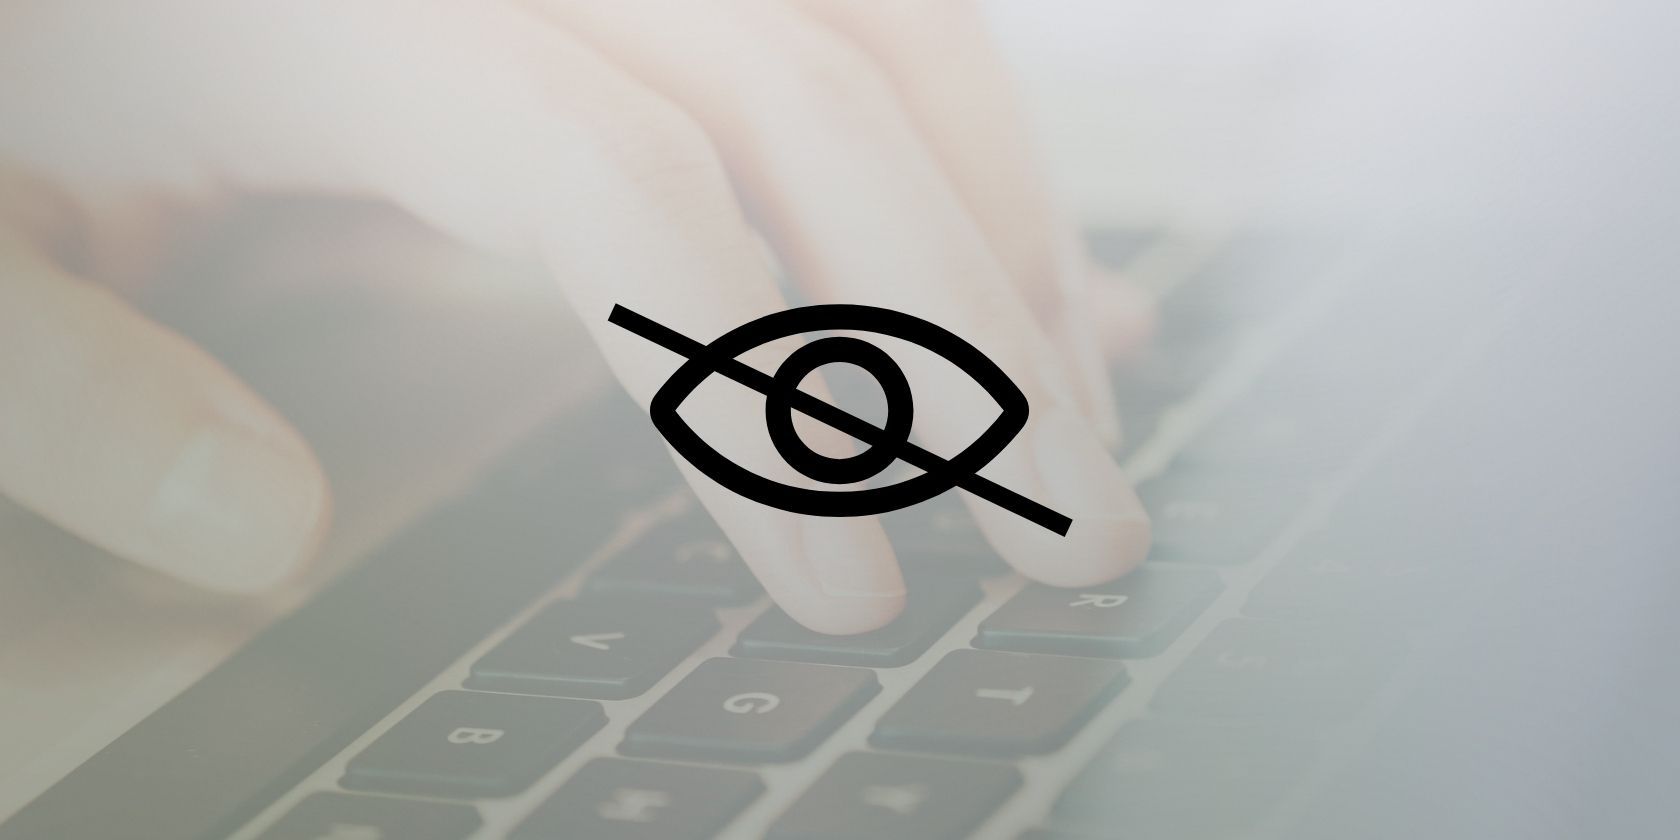 An image of an eye with a line diagonally across it with the background image blurry